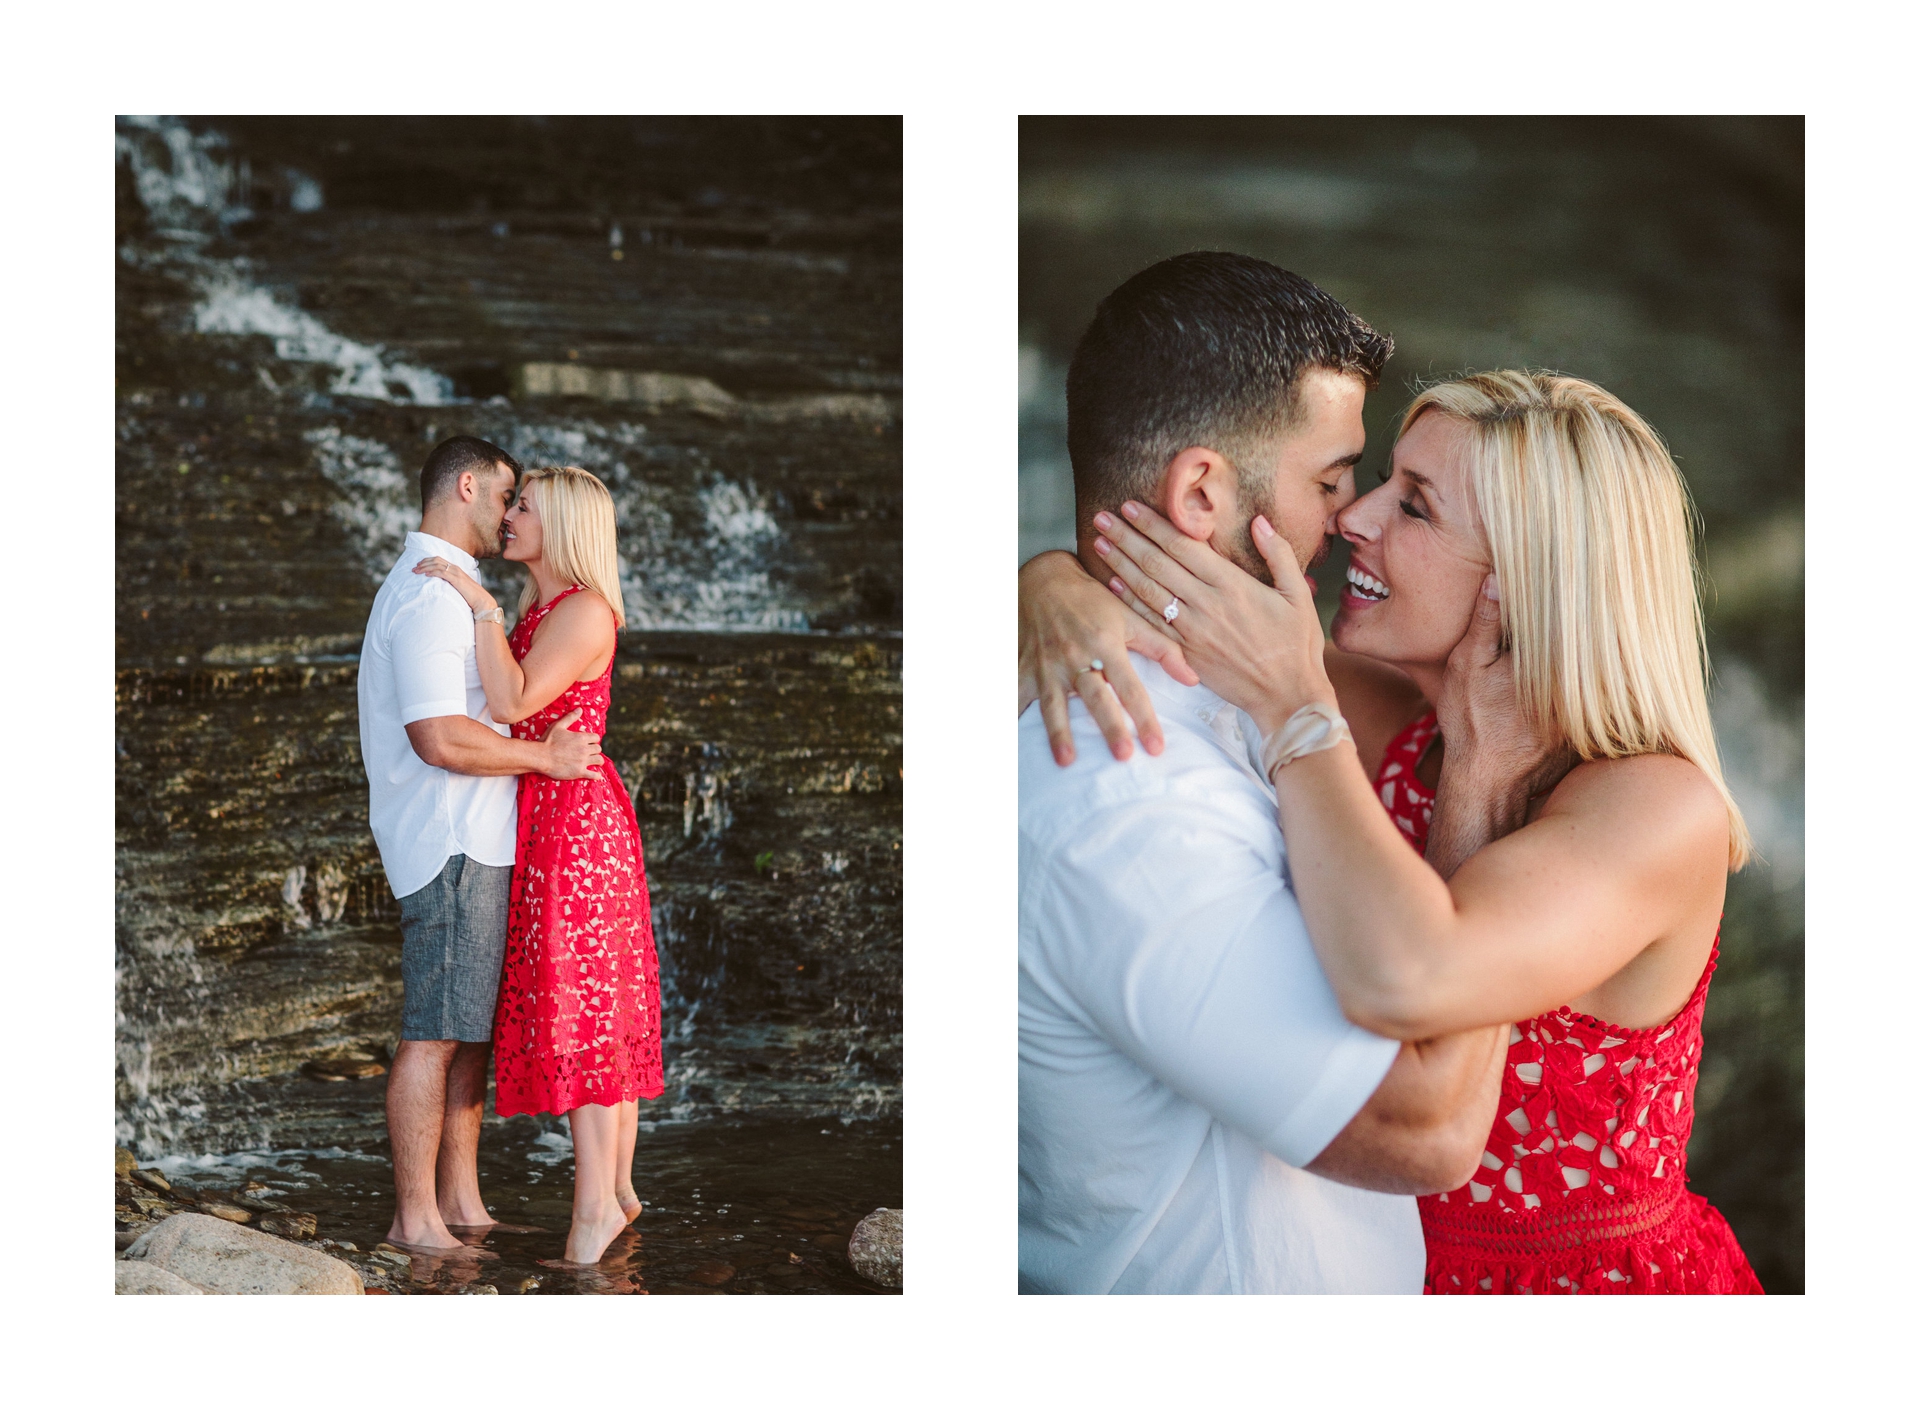 Sara Shookman Angelo DiFranco Engagement photos in cleveland by too much awesomeness photography 42.jpg